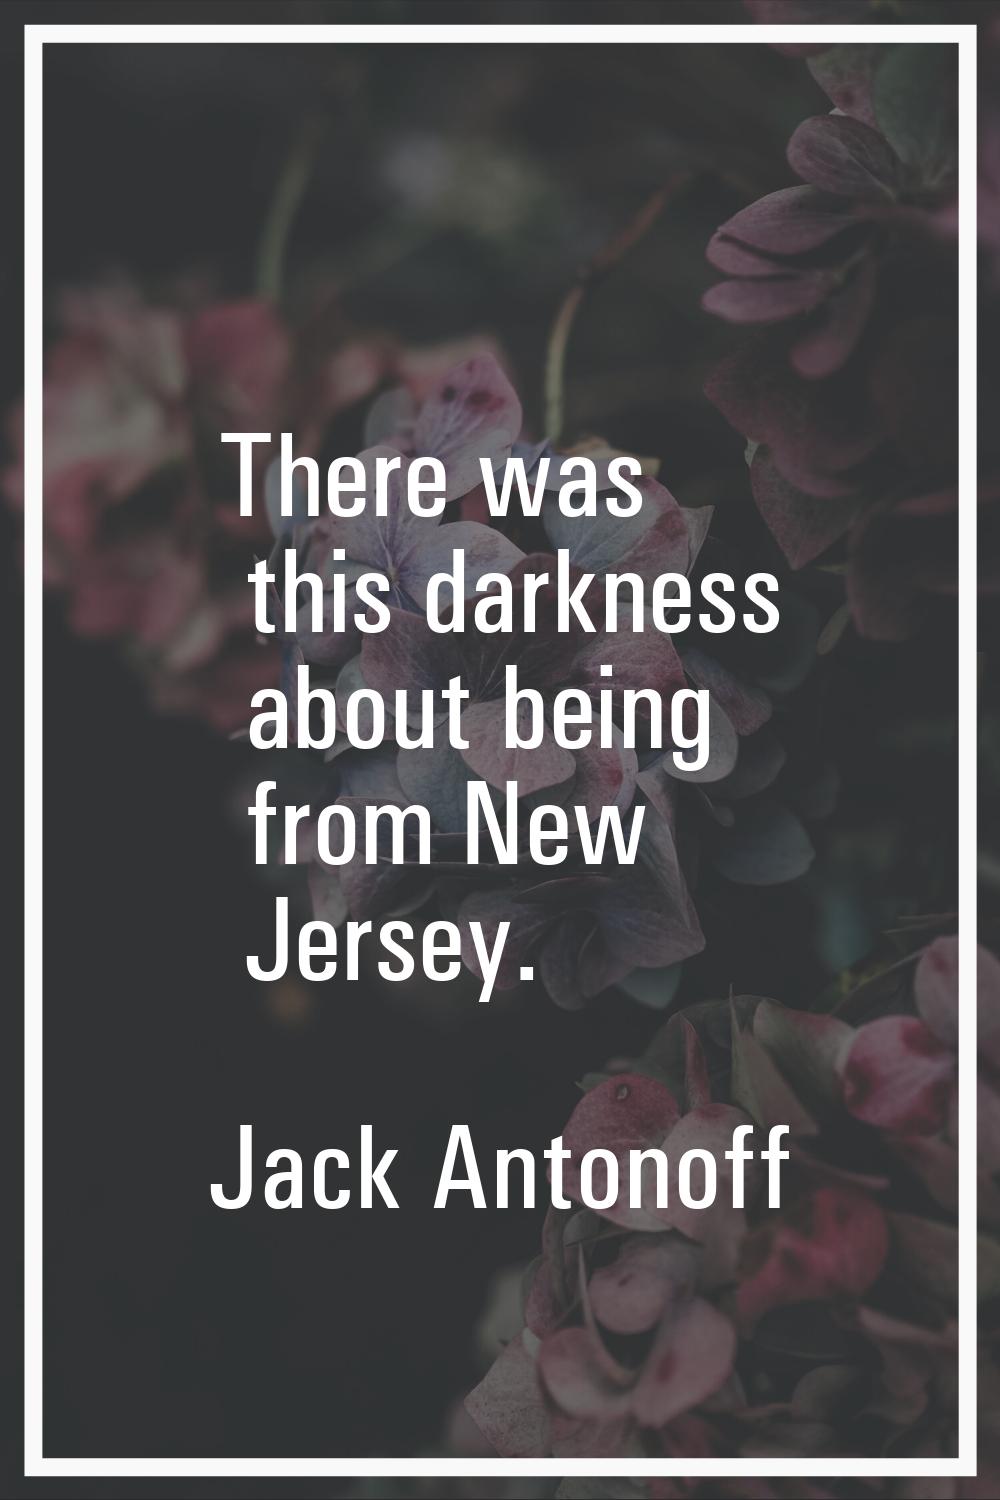 There was this darkness about being from New Jersey.